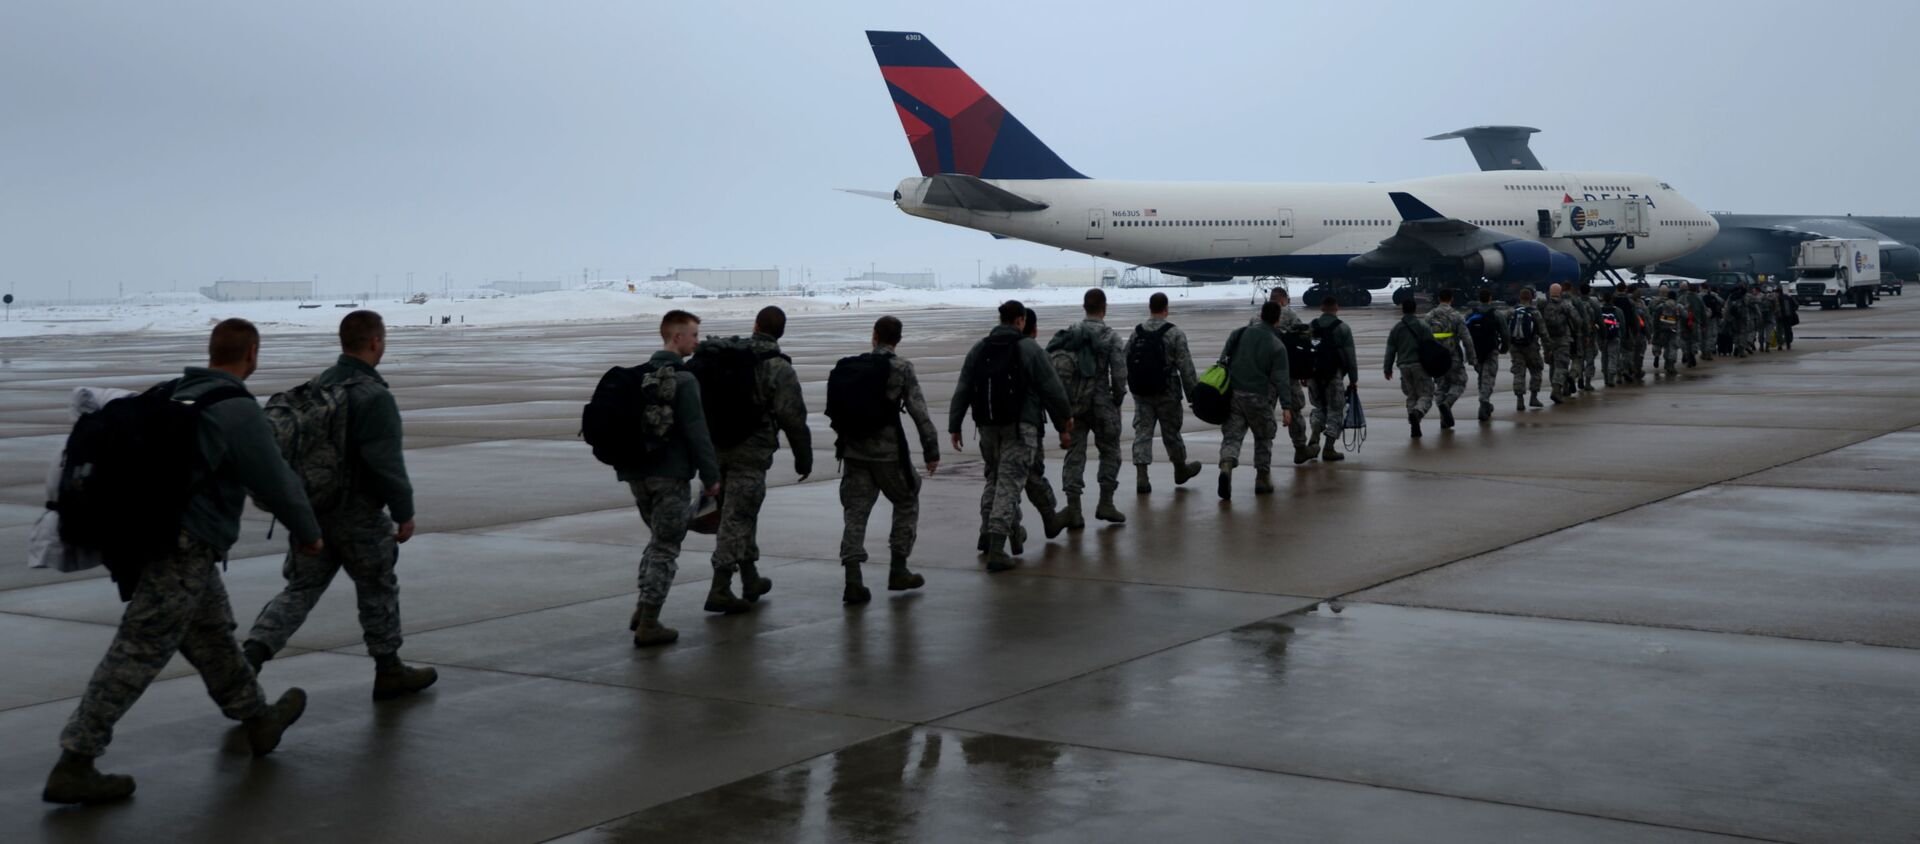 Airmen of the 388th and the 419th Fighter Wings from Hill Air Force Base, Utah prepare to board an aircraft for deployment to Osan Air Force Base, South Korea, Jan. 11, 2014. The 388th and 419th airmen will deploy as part of a Theater Security Package (TSP) to assist with supporting and defending the South Korean border with North Korea. (U.S. Air Force photo by Senior Airman Justyn M. Freeman/Released) - Sputnik International, 1920, 10.03.2021